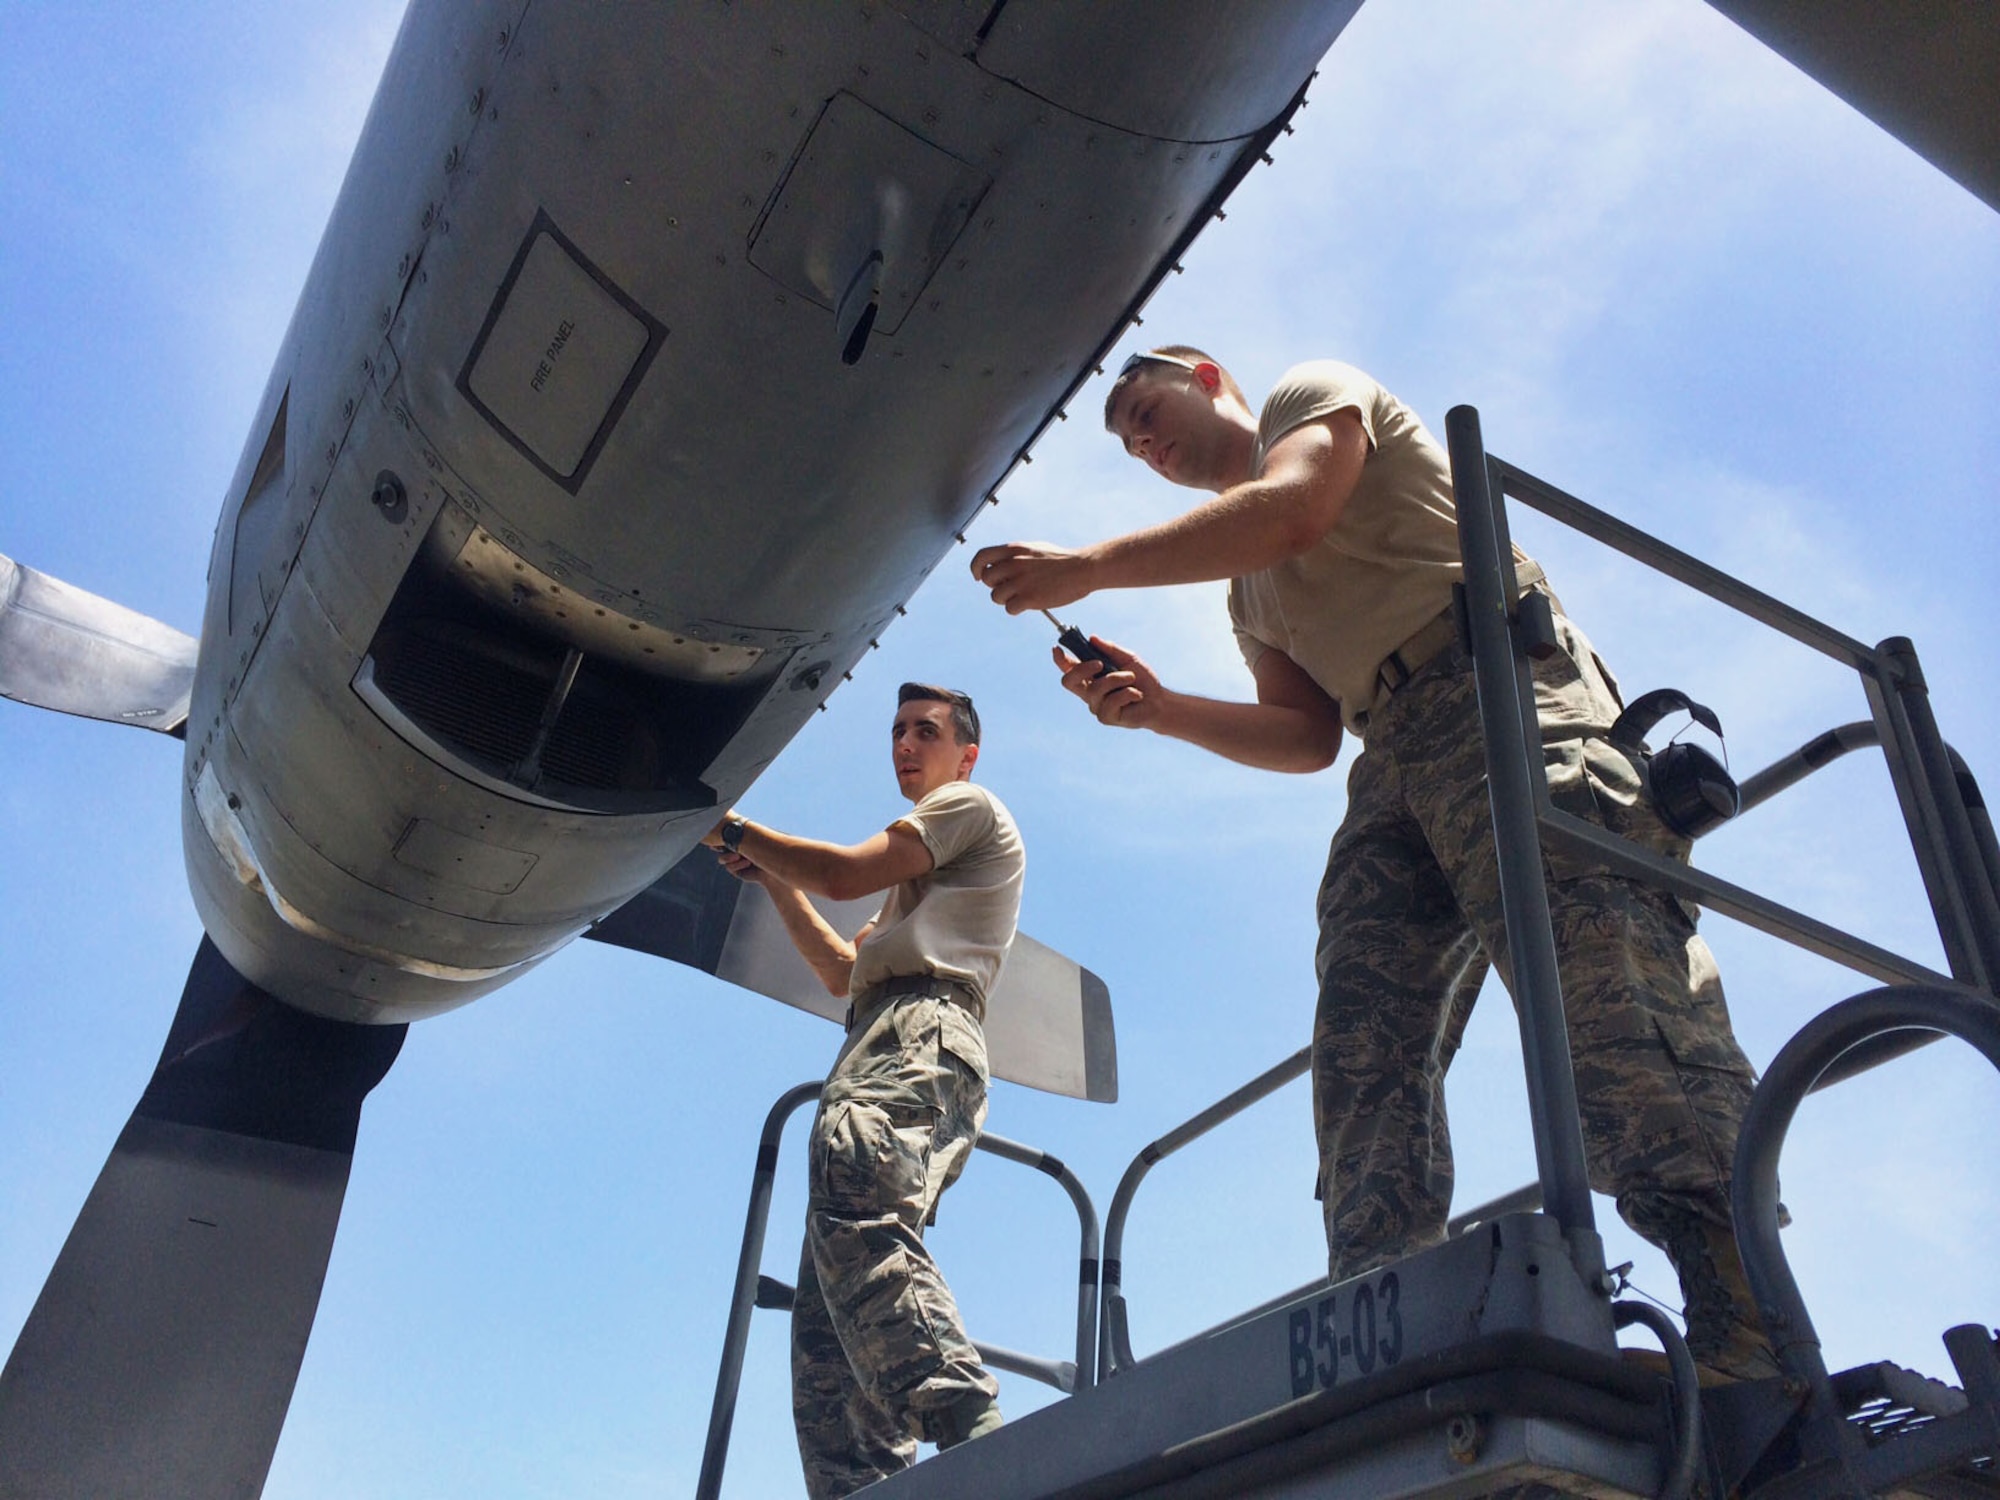 Staff Sgt. Vincenzo Lafronza (left), with the 123rd Maintenance Group, Kentucky Air National Guard, and Senior Airman Steven Maniscalco (right), with the 103rd Maintenance Squadron, Connecticut Air National Guard, fasten cam locks after closing an access panel on the C-130H aircraft at the Combat Readiness Training center, Gulfport, Miss., June 24, 2014. Inspecting access panels is part of the basic post flight inspection in which Kentucky and Connecticut maintenance Airmen are receiving training. (U.S. Air National Guard photo by Senior Airman Jennifer Pierce)